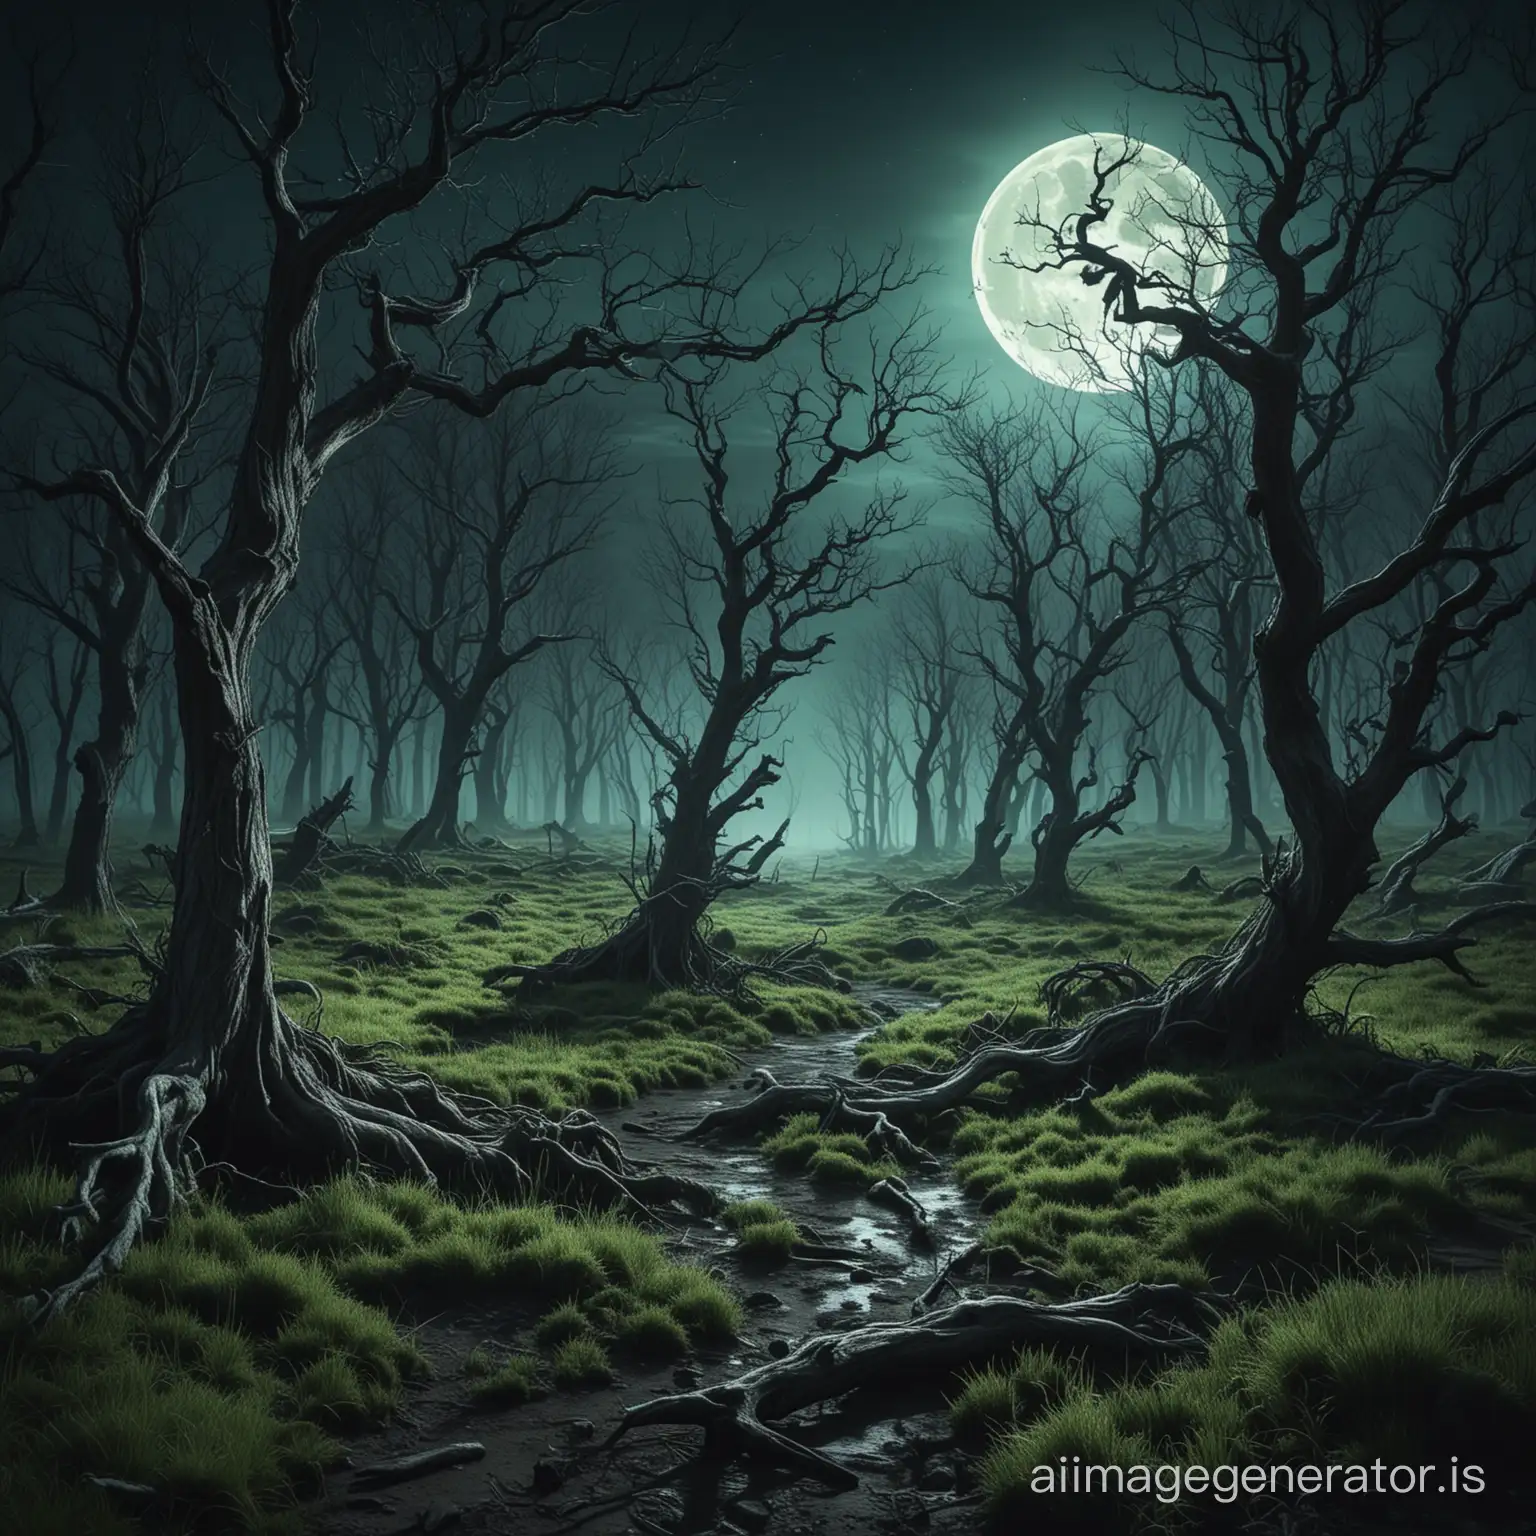 Eerie-Moonlit-Forest-with-Twisted-Trees-and-Lush-Green-Grass